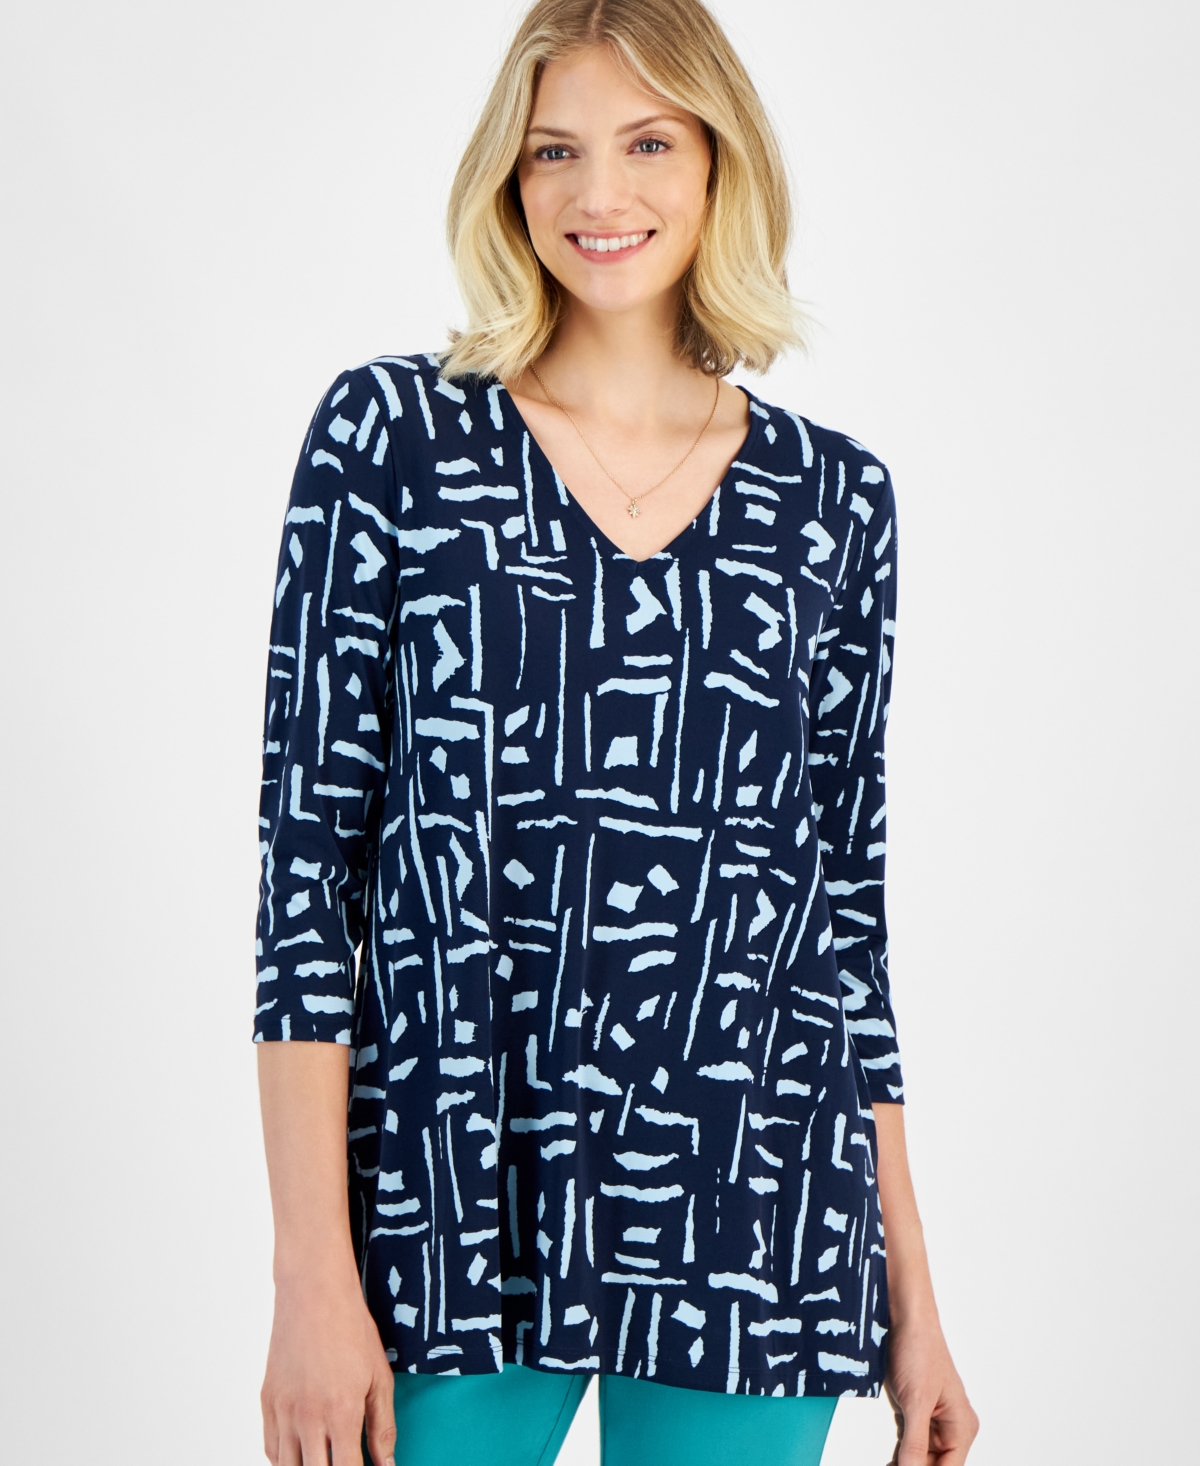 Women's Printed 3/4-Sleeve Tunic Top, Created for Macy's - Intrepd Blue Cb